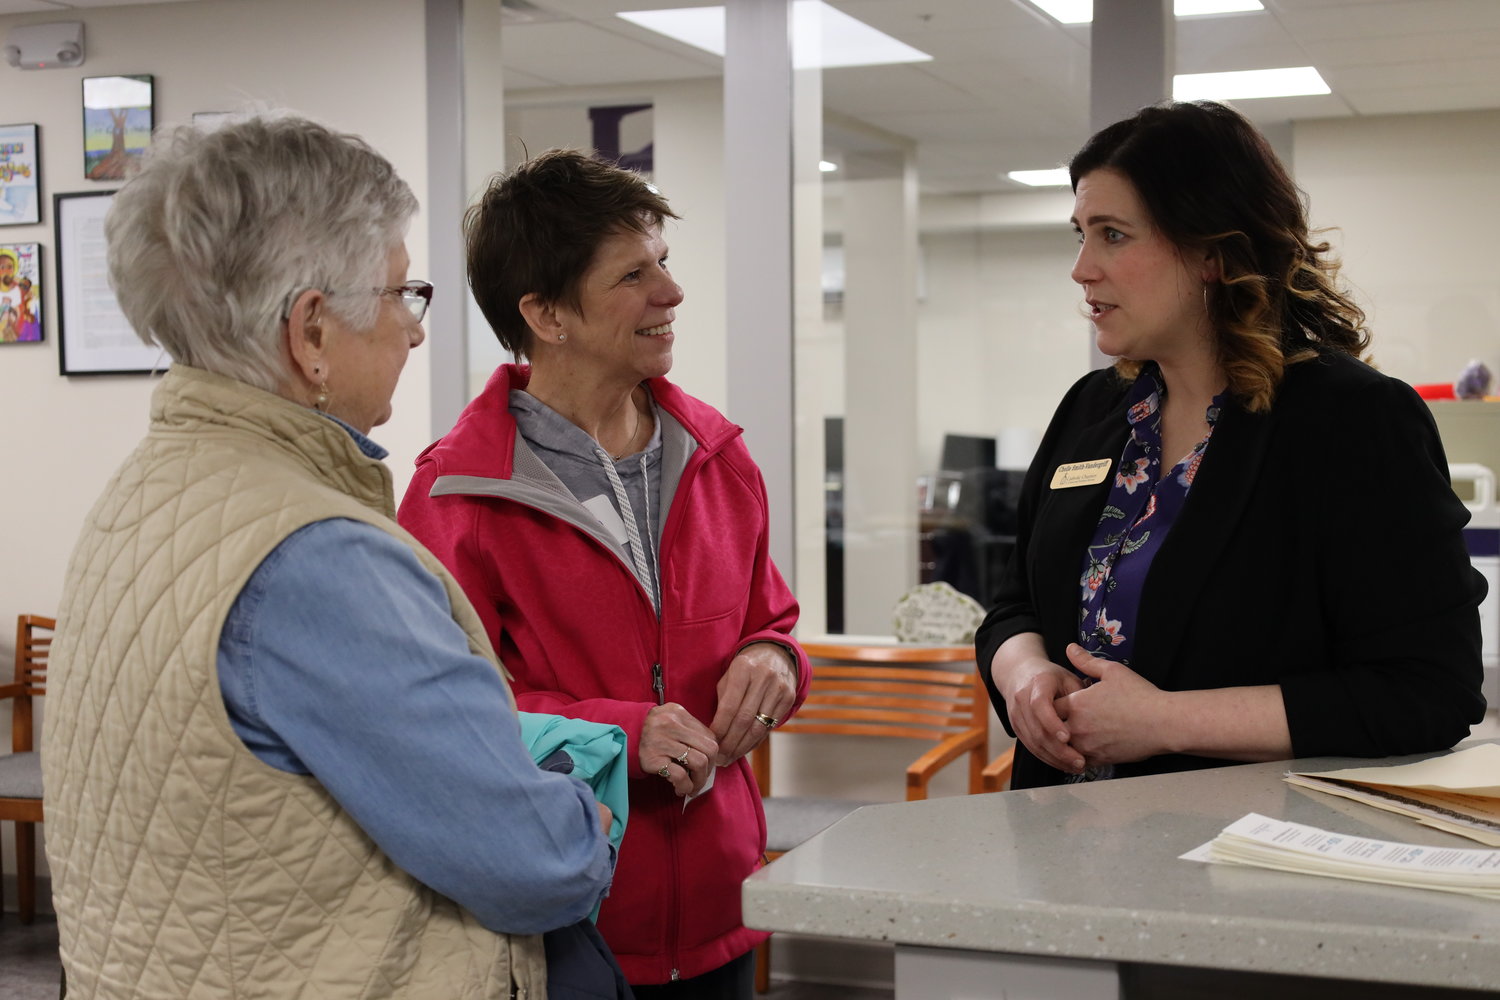 Sr. Director of Volunteer Engagement, Chelle Smith-Vandergriff gives tours to community members and shares information about volunteer opportunities at the Central Office and in the Catholic Charities Food Pantry.